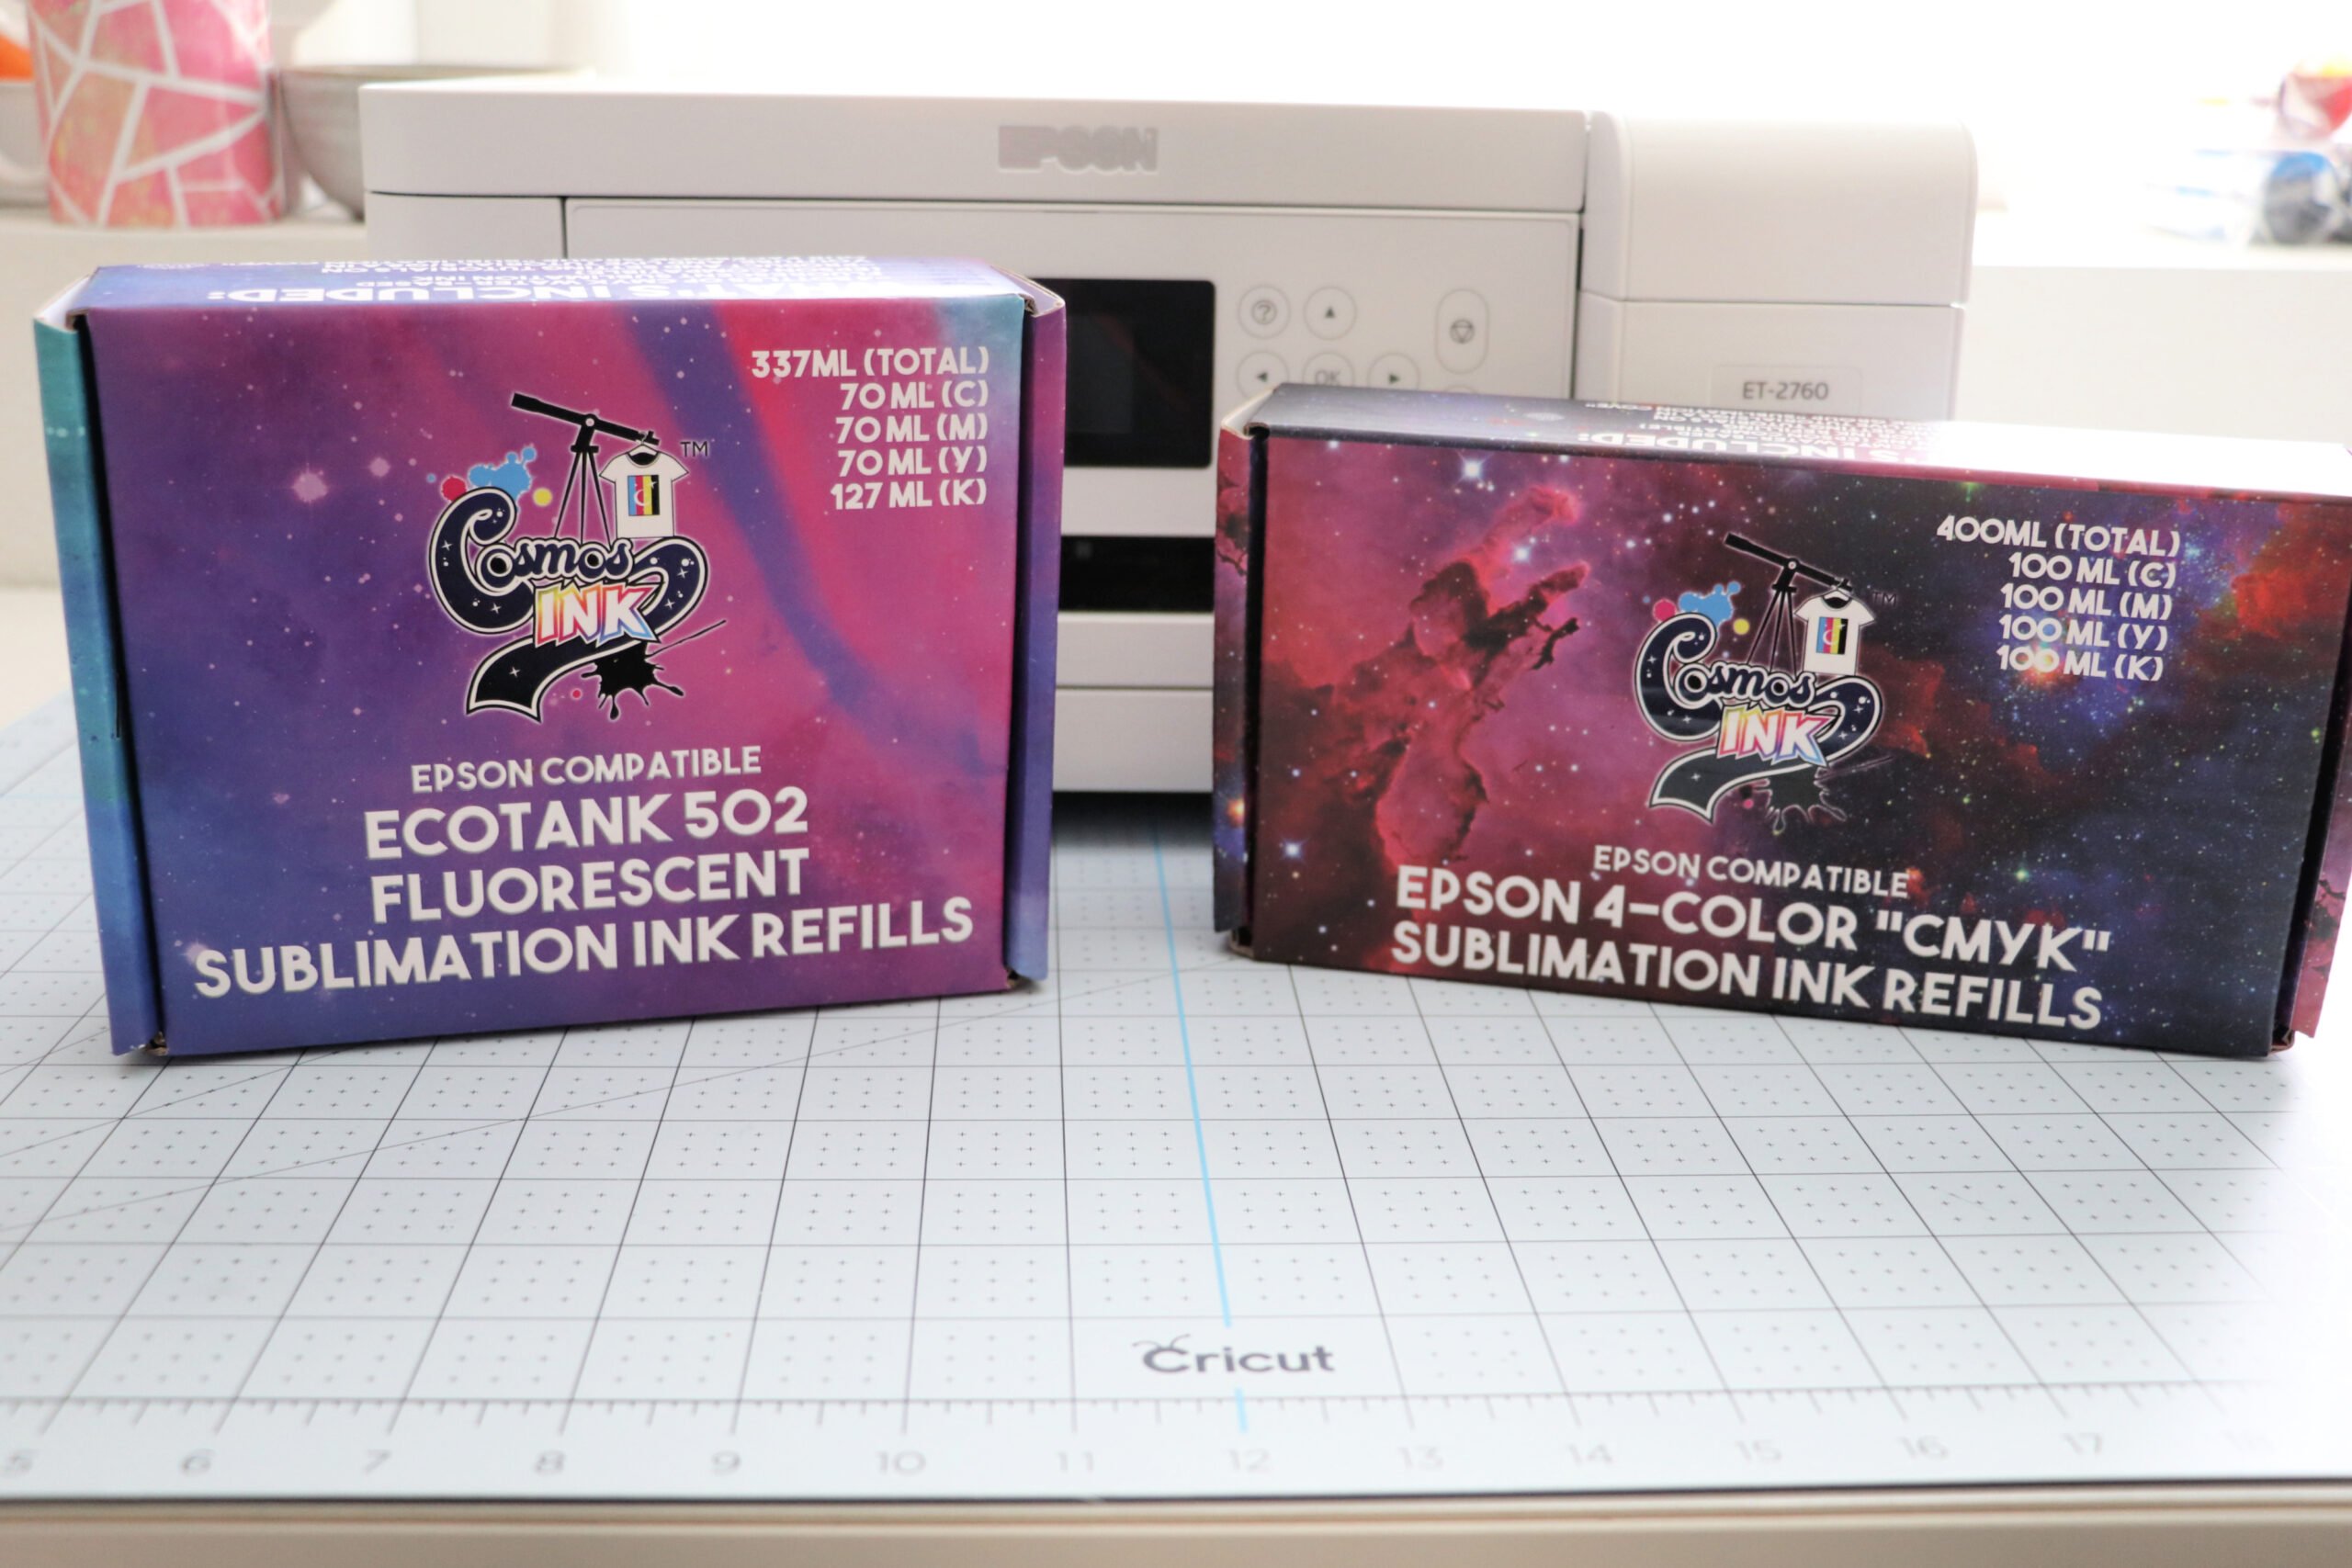 Which sublimation ink should I buy? Which ink is the best? Let's